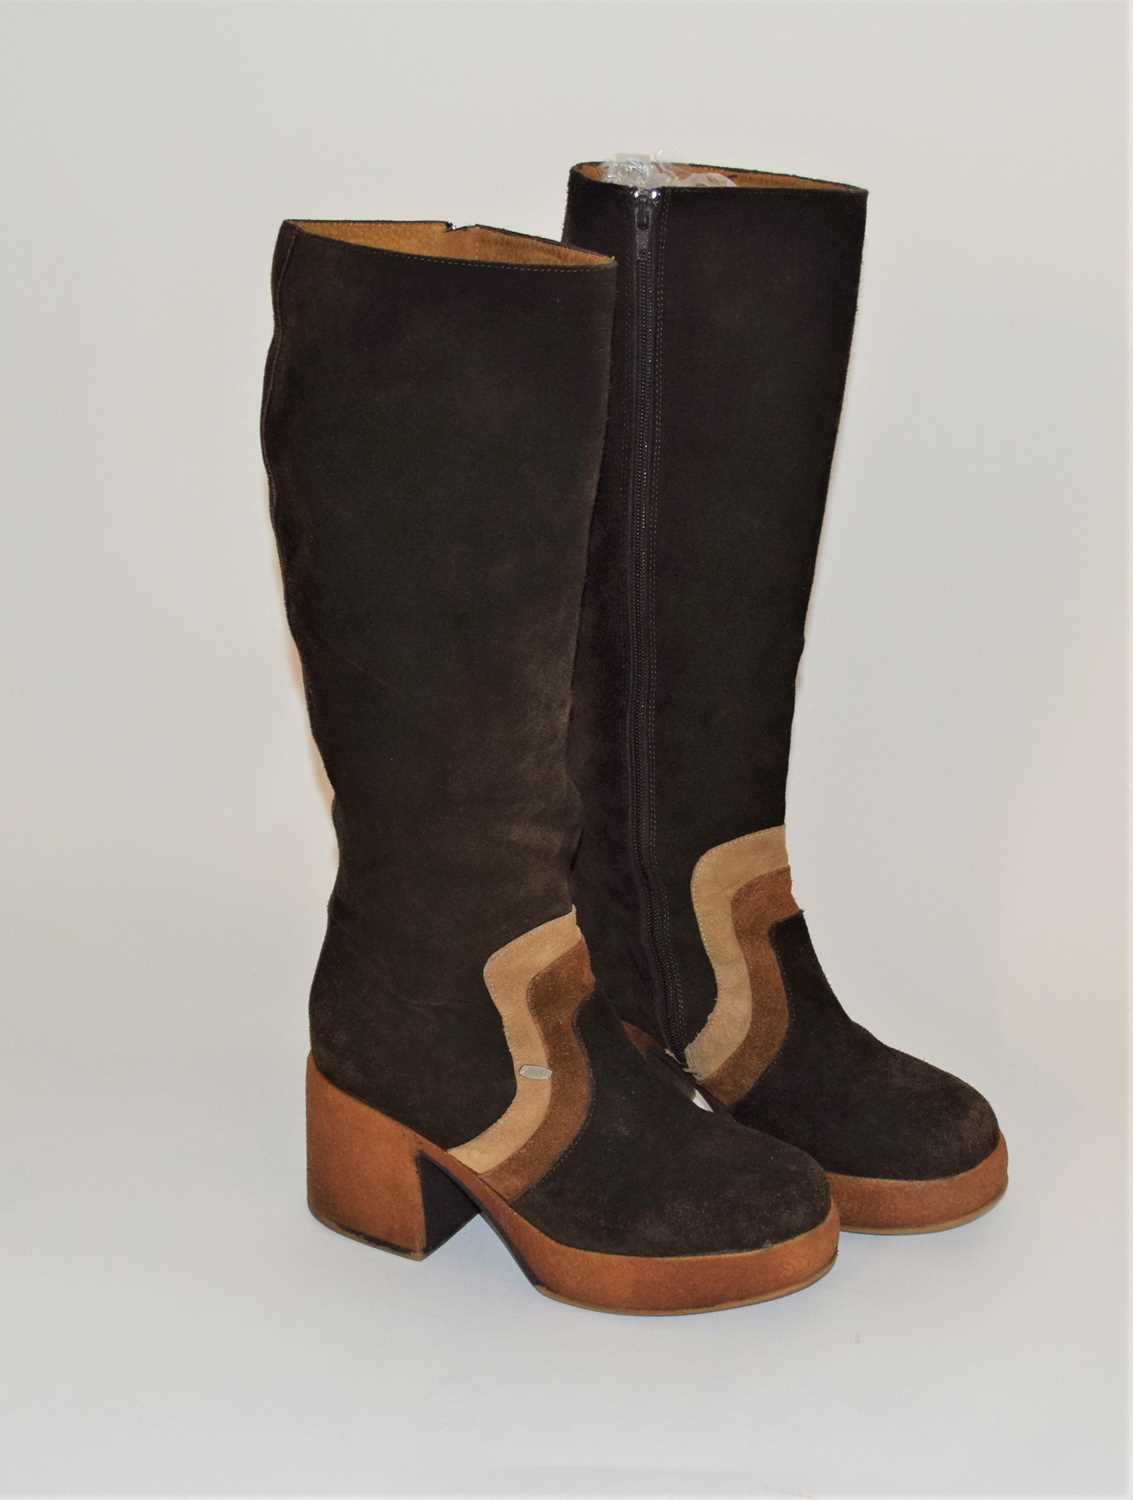 A pair of 1970's brown suede platform boots, size 39